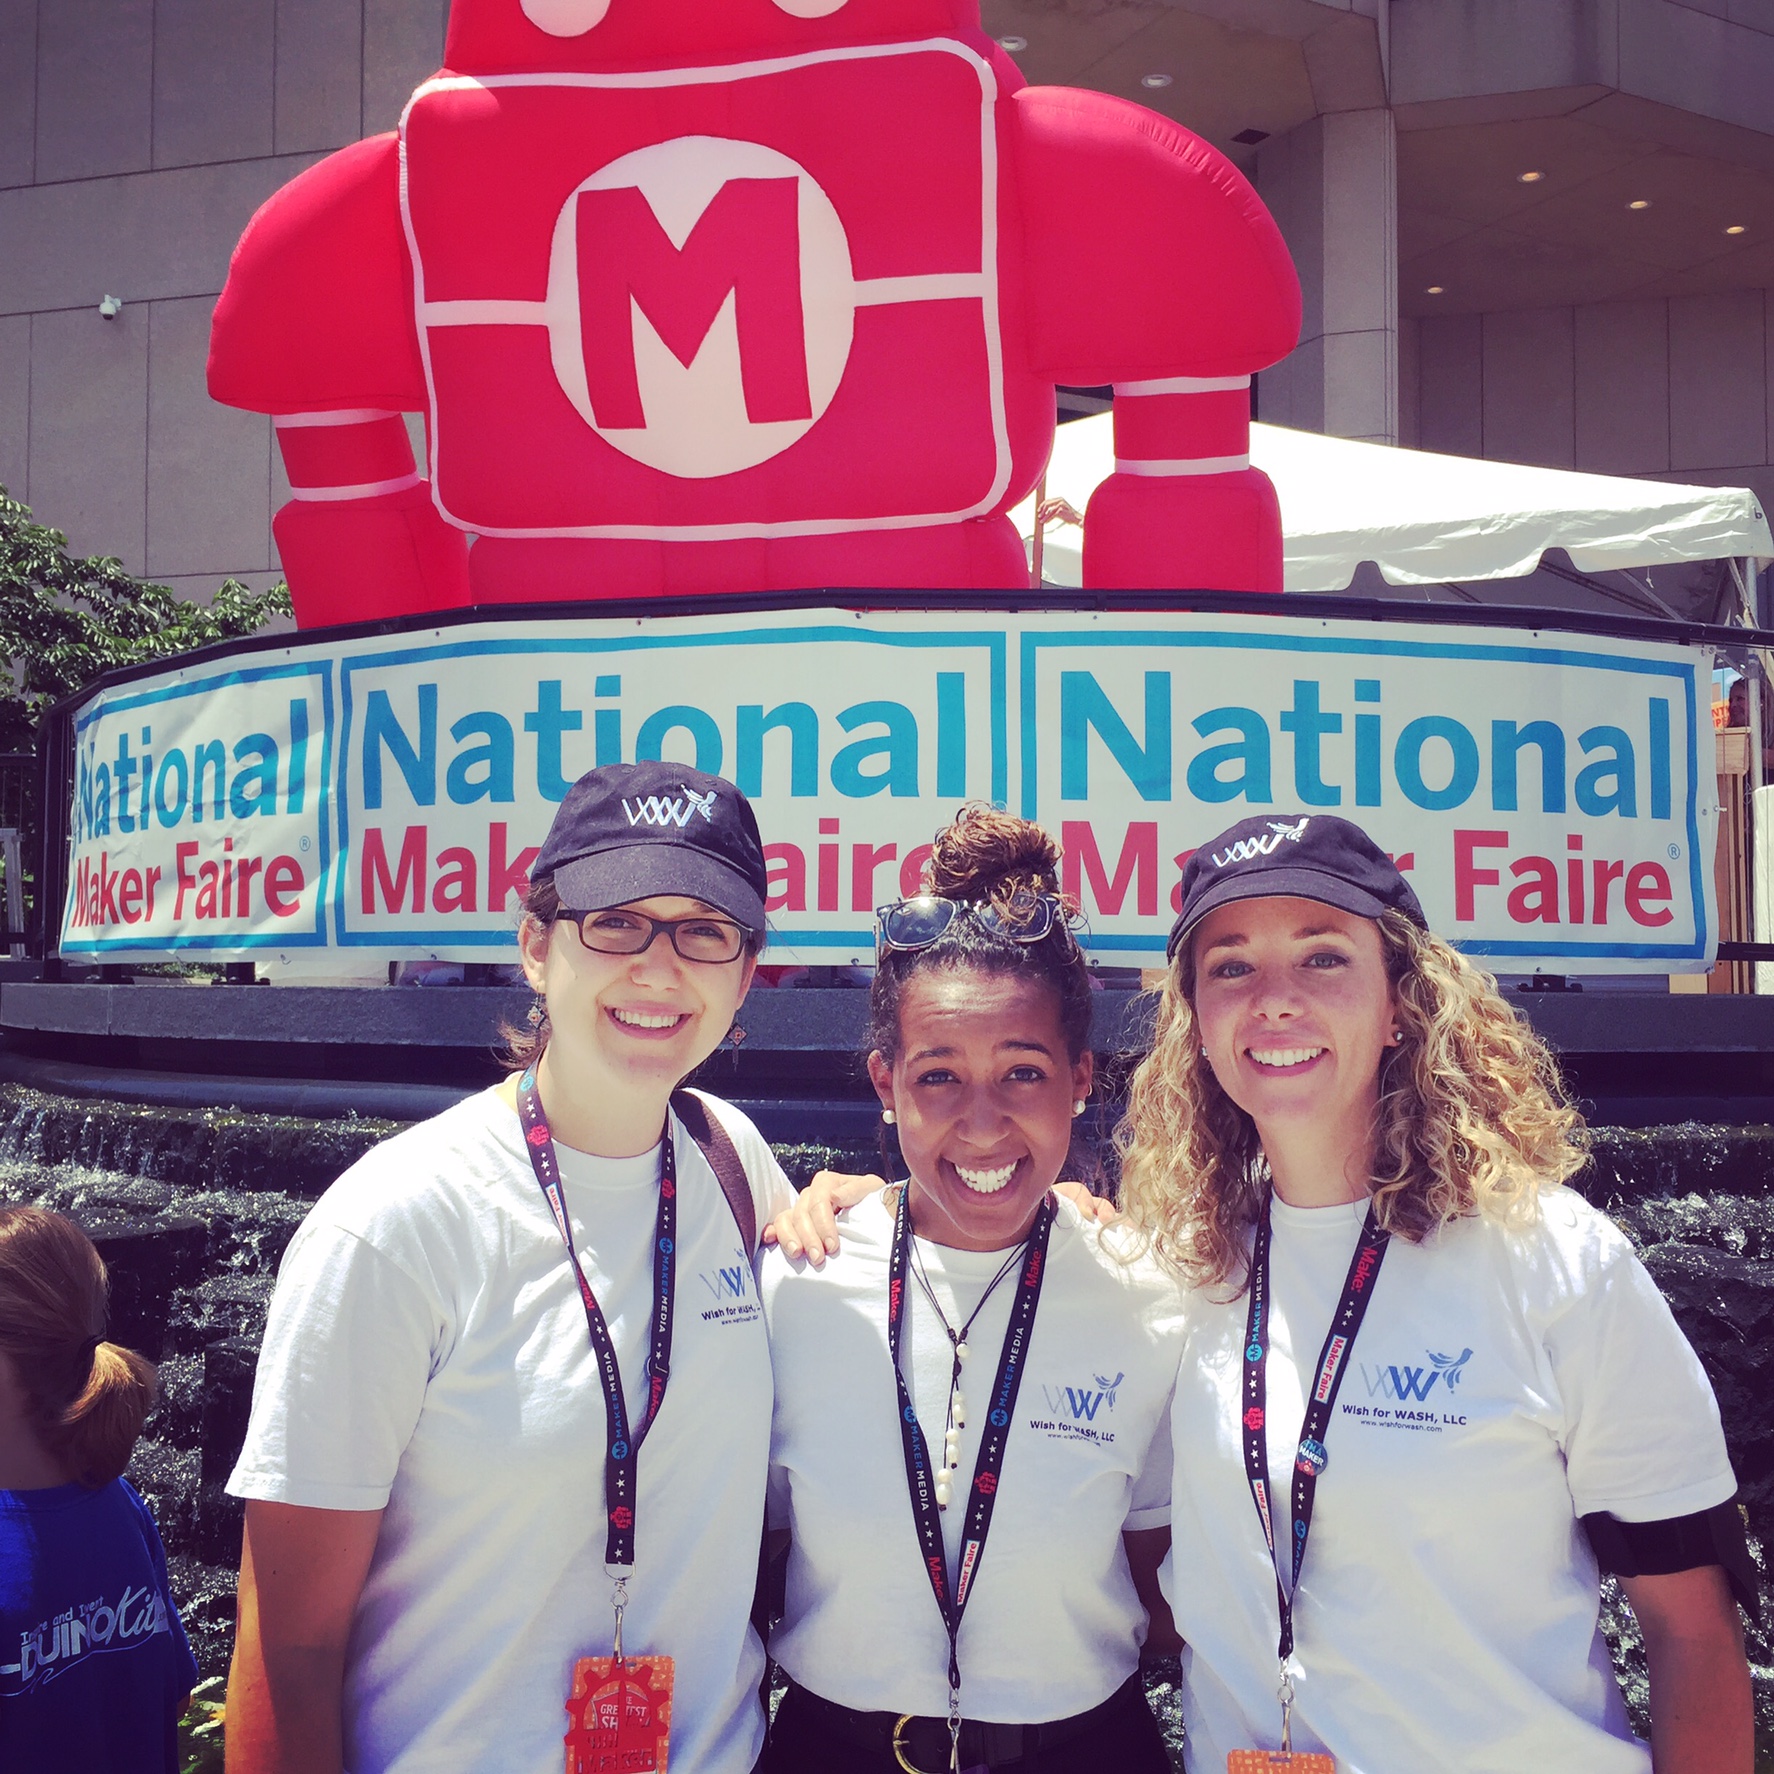 Wish for WASH, a startup formed by social entrepreneurs from Georgia Tech, participated in the 2015 National Maker Faire held in Washington, D.C.  The humanitarian organization seeks to solve the global problems caused by lack of access to water, sanitation and hygiene. Team members (from left to right) are: Katie Isaf, Jasmine Burton and Alex Dorman. 